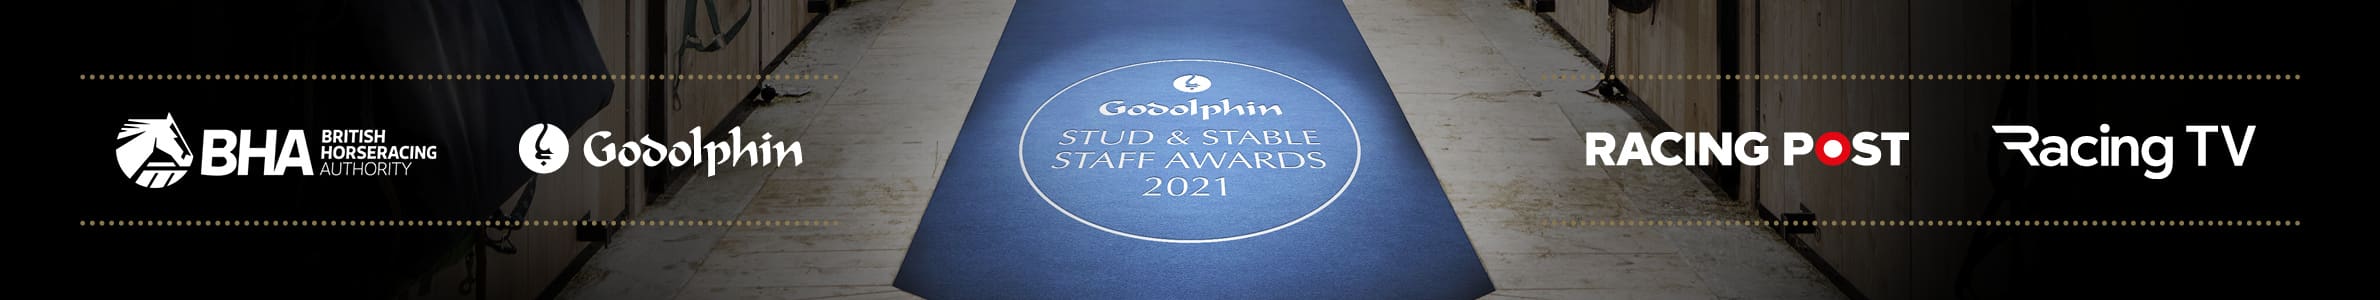 Stud and Stable Staff Awards 2021 image